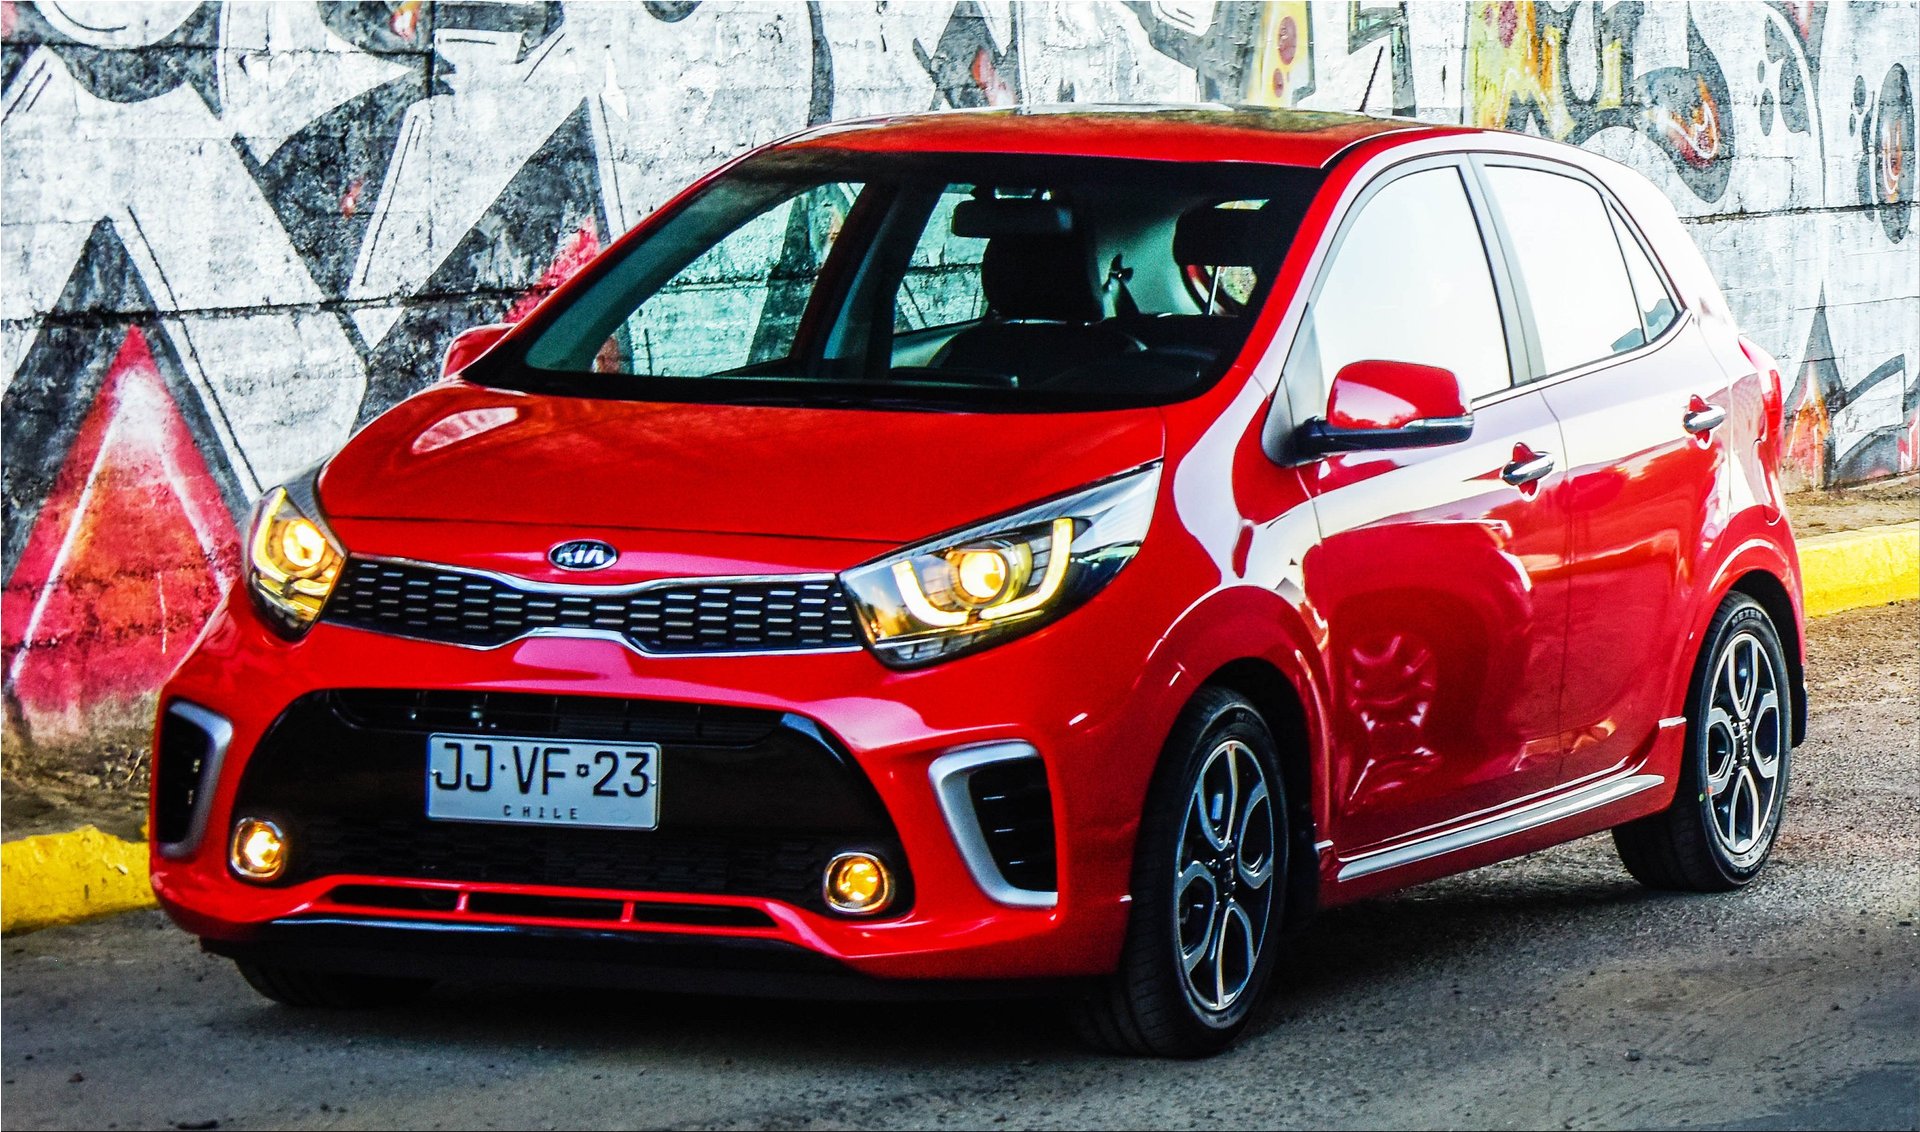 Kia Picanto facelift has an affordable price